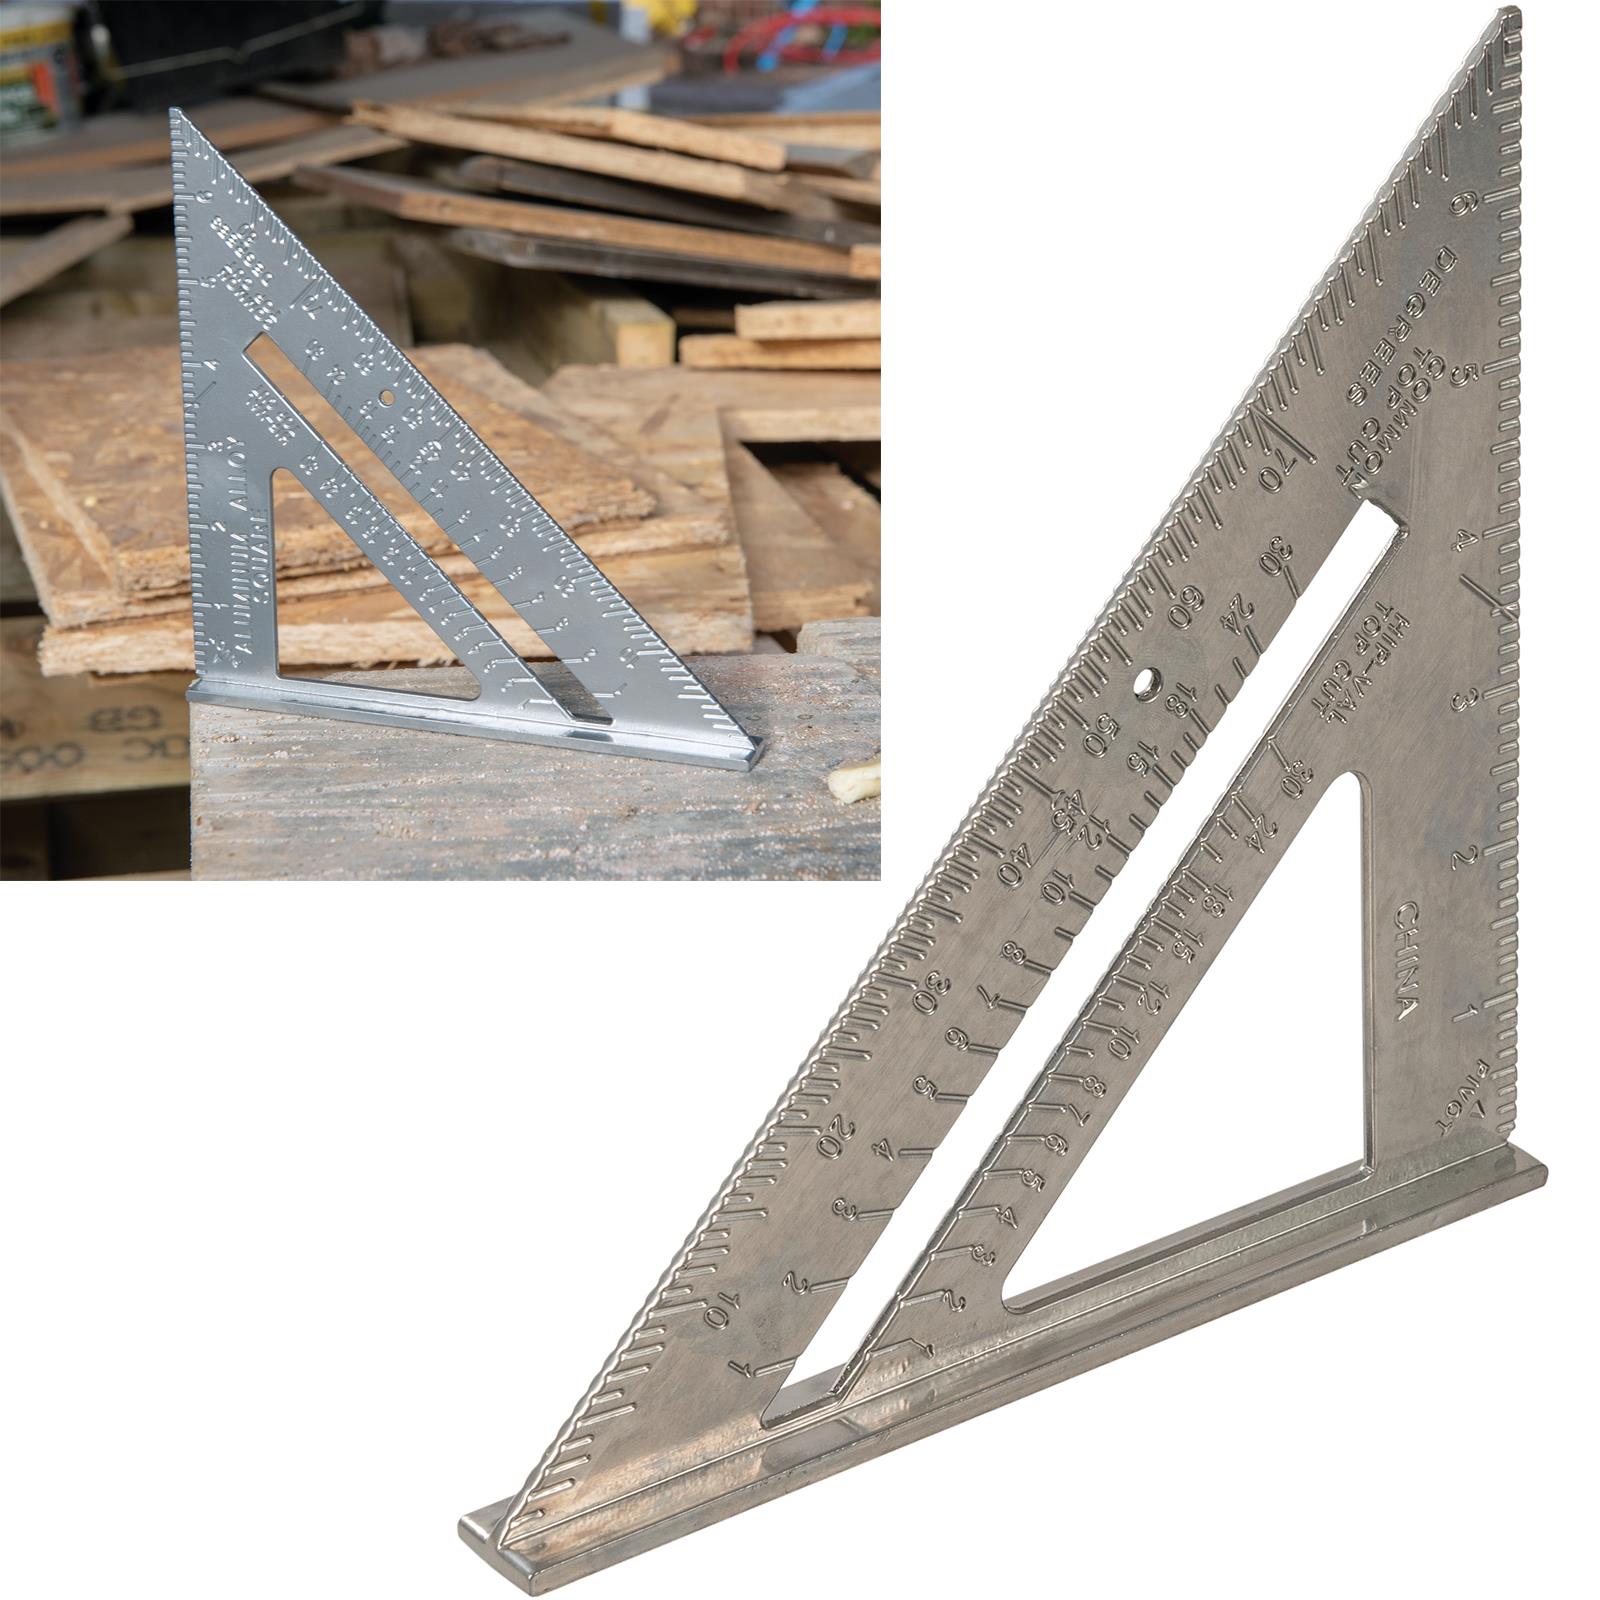 Silverline 7" Aluminium Alloy Roofing Square Framing Roof Mitre Lipped Edge